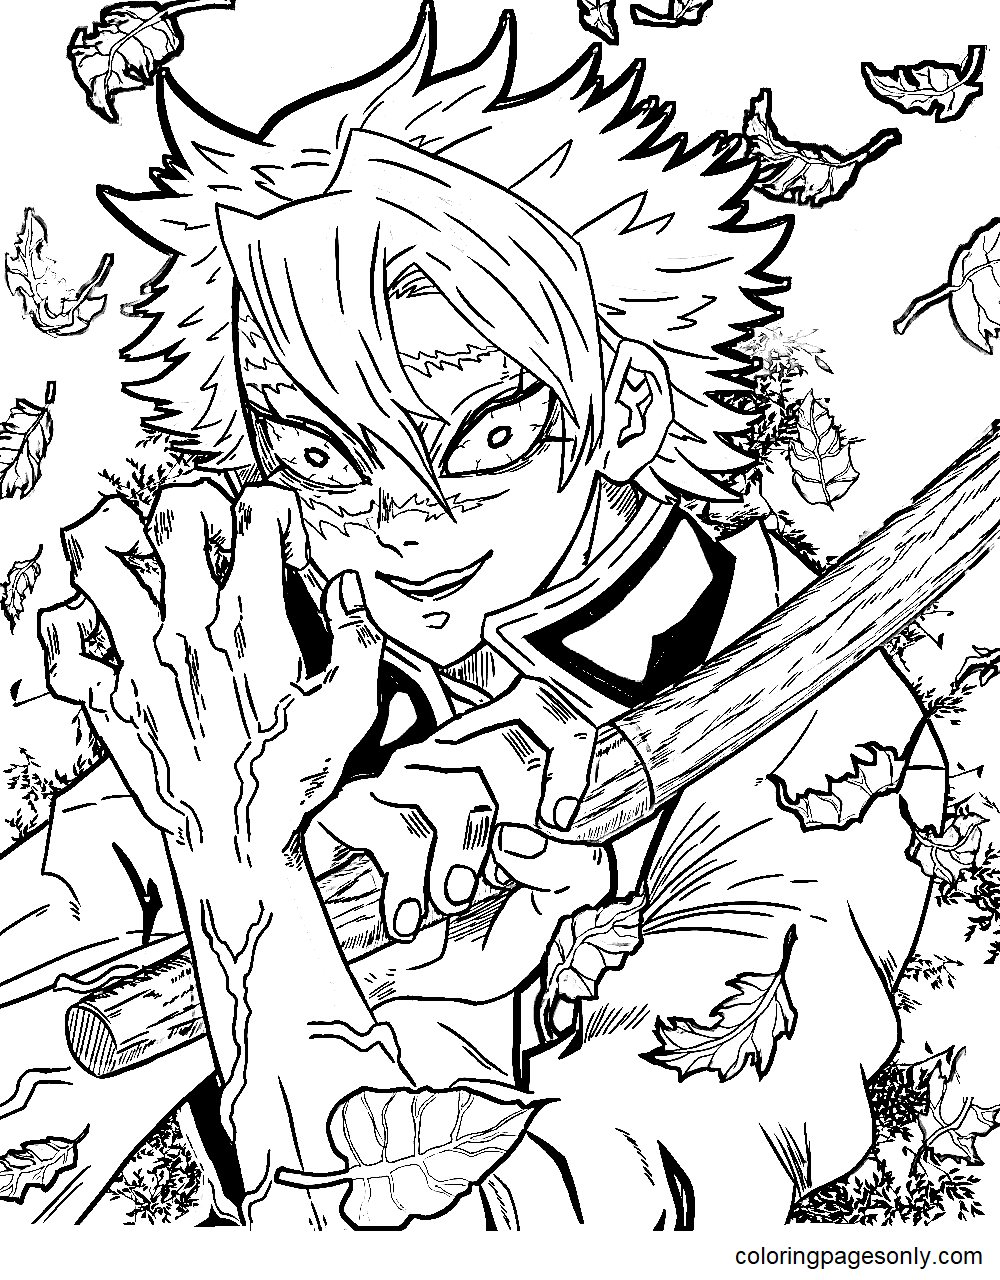 Sanemi in Demon Slayer Coloring Pages